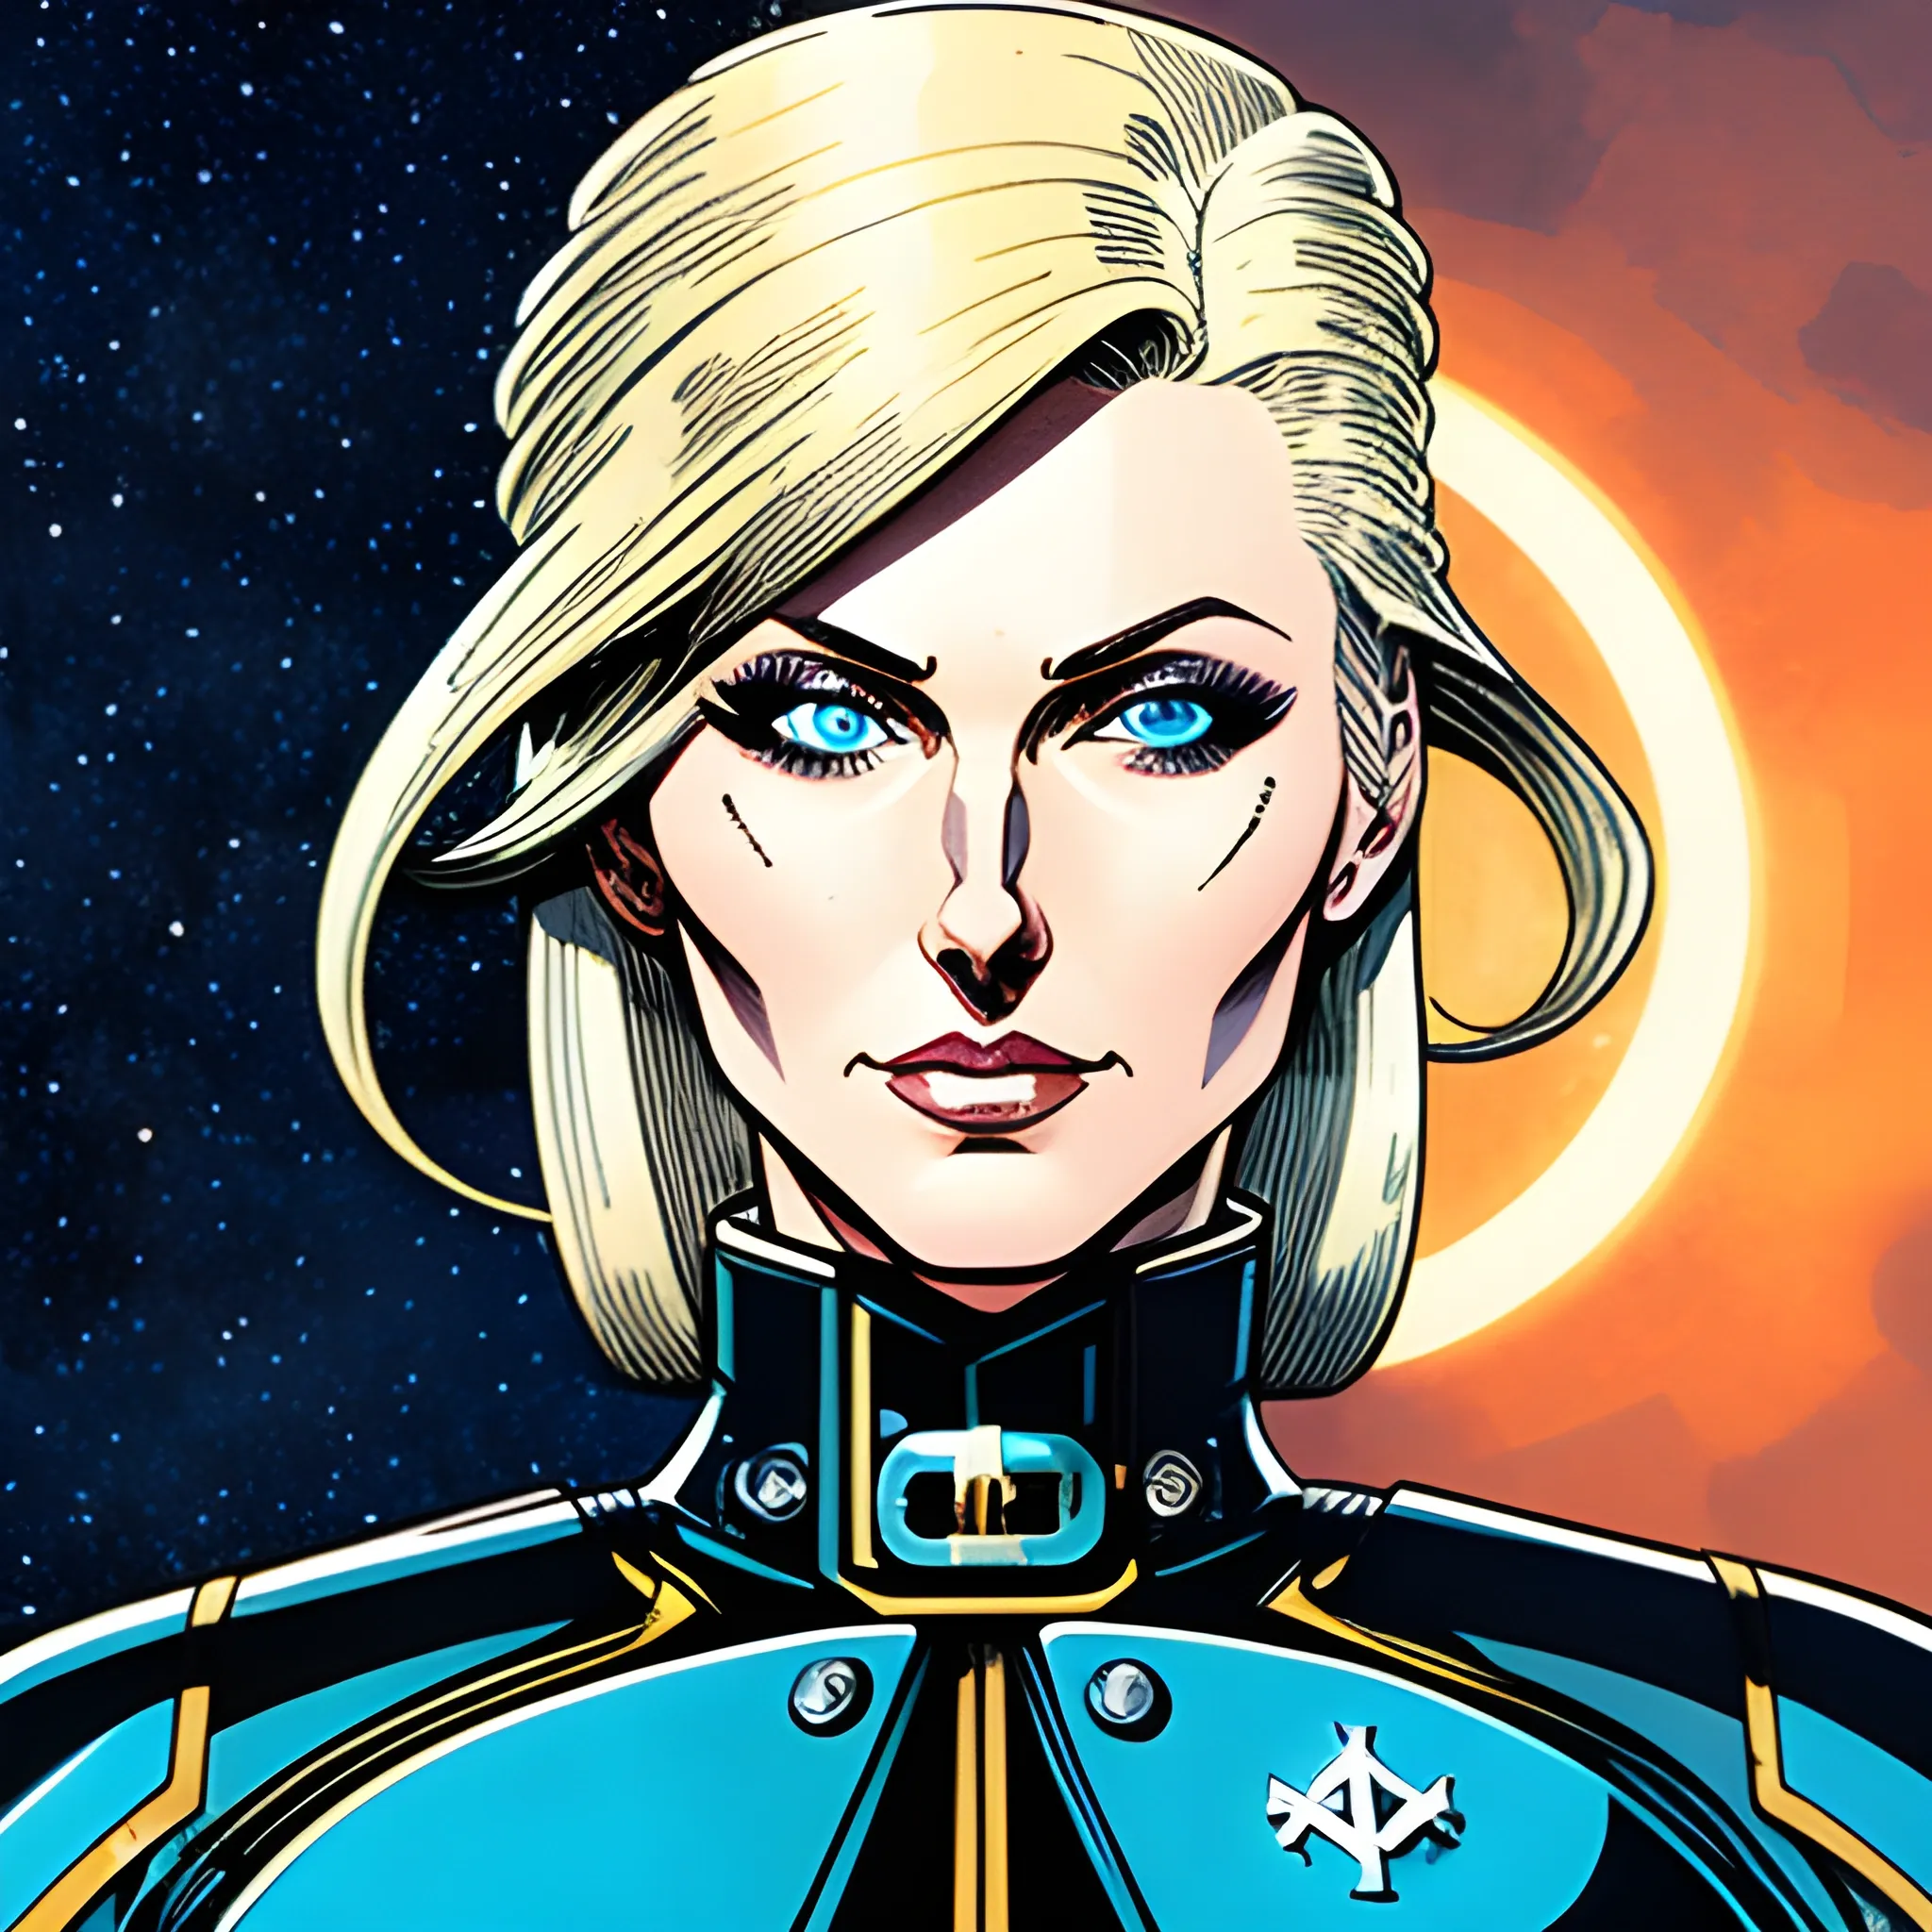 futuristic steampunk giant starship, macro art, portrait of stern anime girl blonde hair blue eyes wearing military nazi ss uniform, ripples, full body illustration by al williamson, perfect face viewed in profile